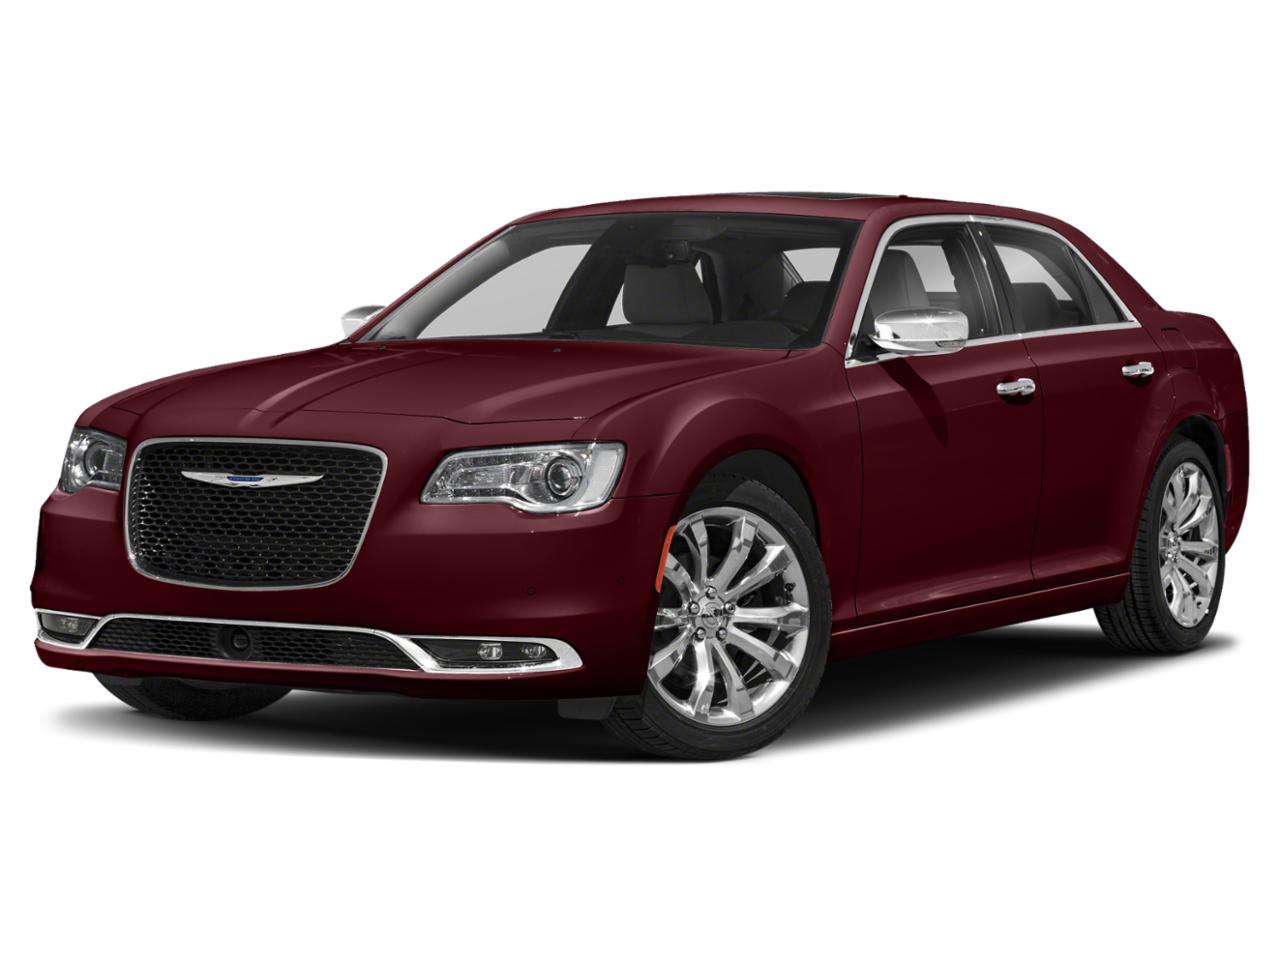 2019 Chrysler 300 Vehicle Photo in Forest Park, IL 60130